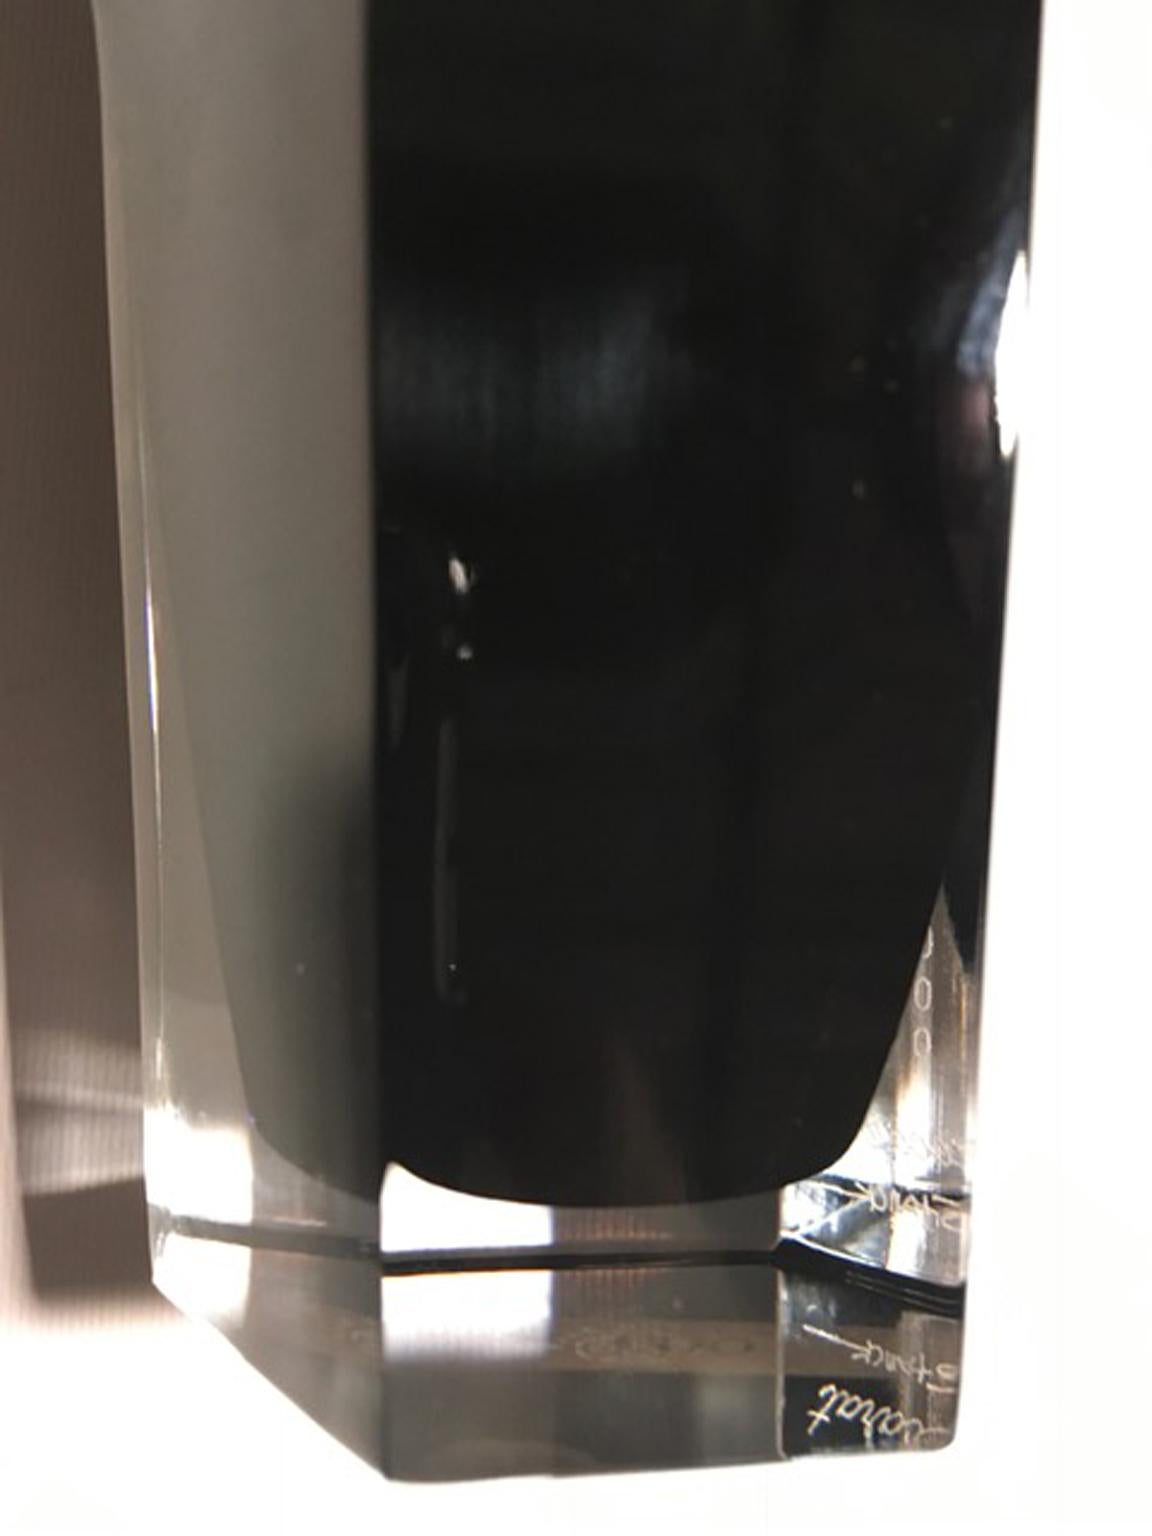 Baccarat First Numbered of Limited Edition Black Crystal by Stark Glass or Vase 1